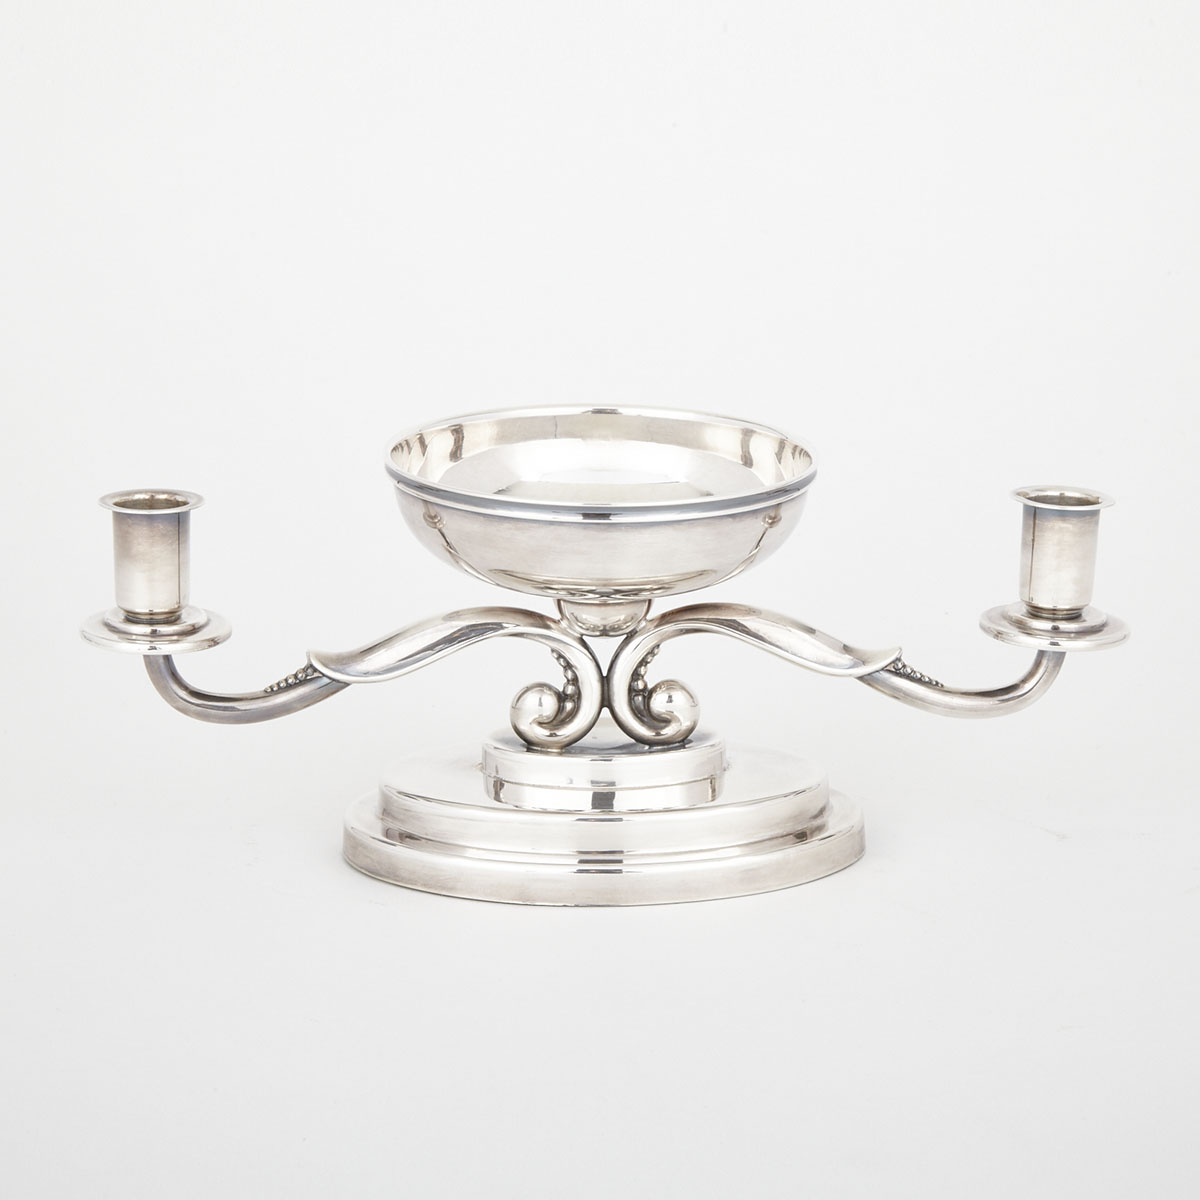 Danish Silver Plated Two-Light Candelabrum Centrepiece, mid-20th century